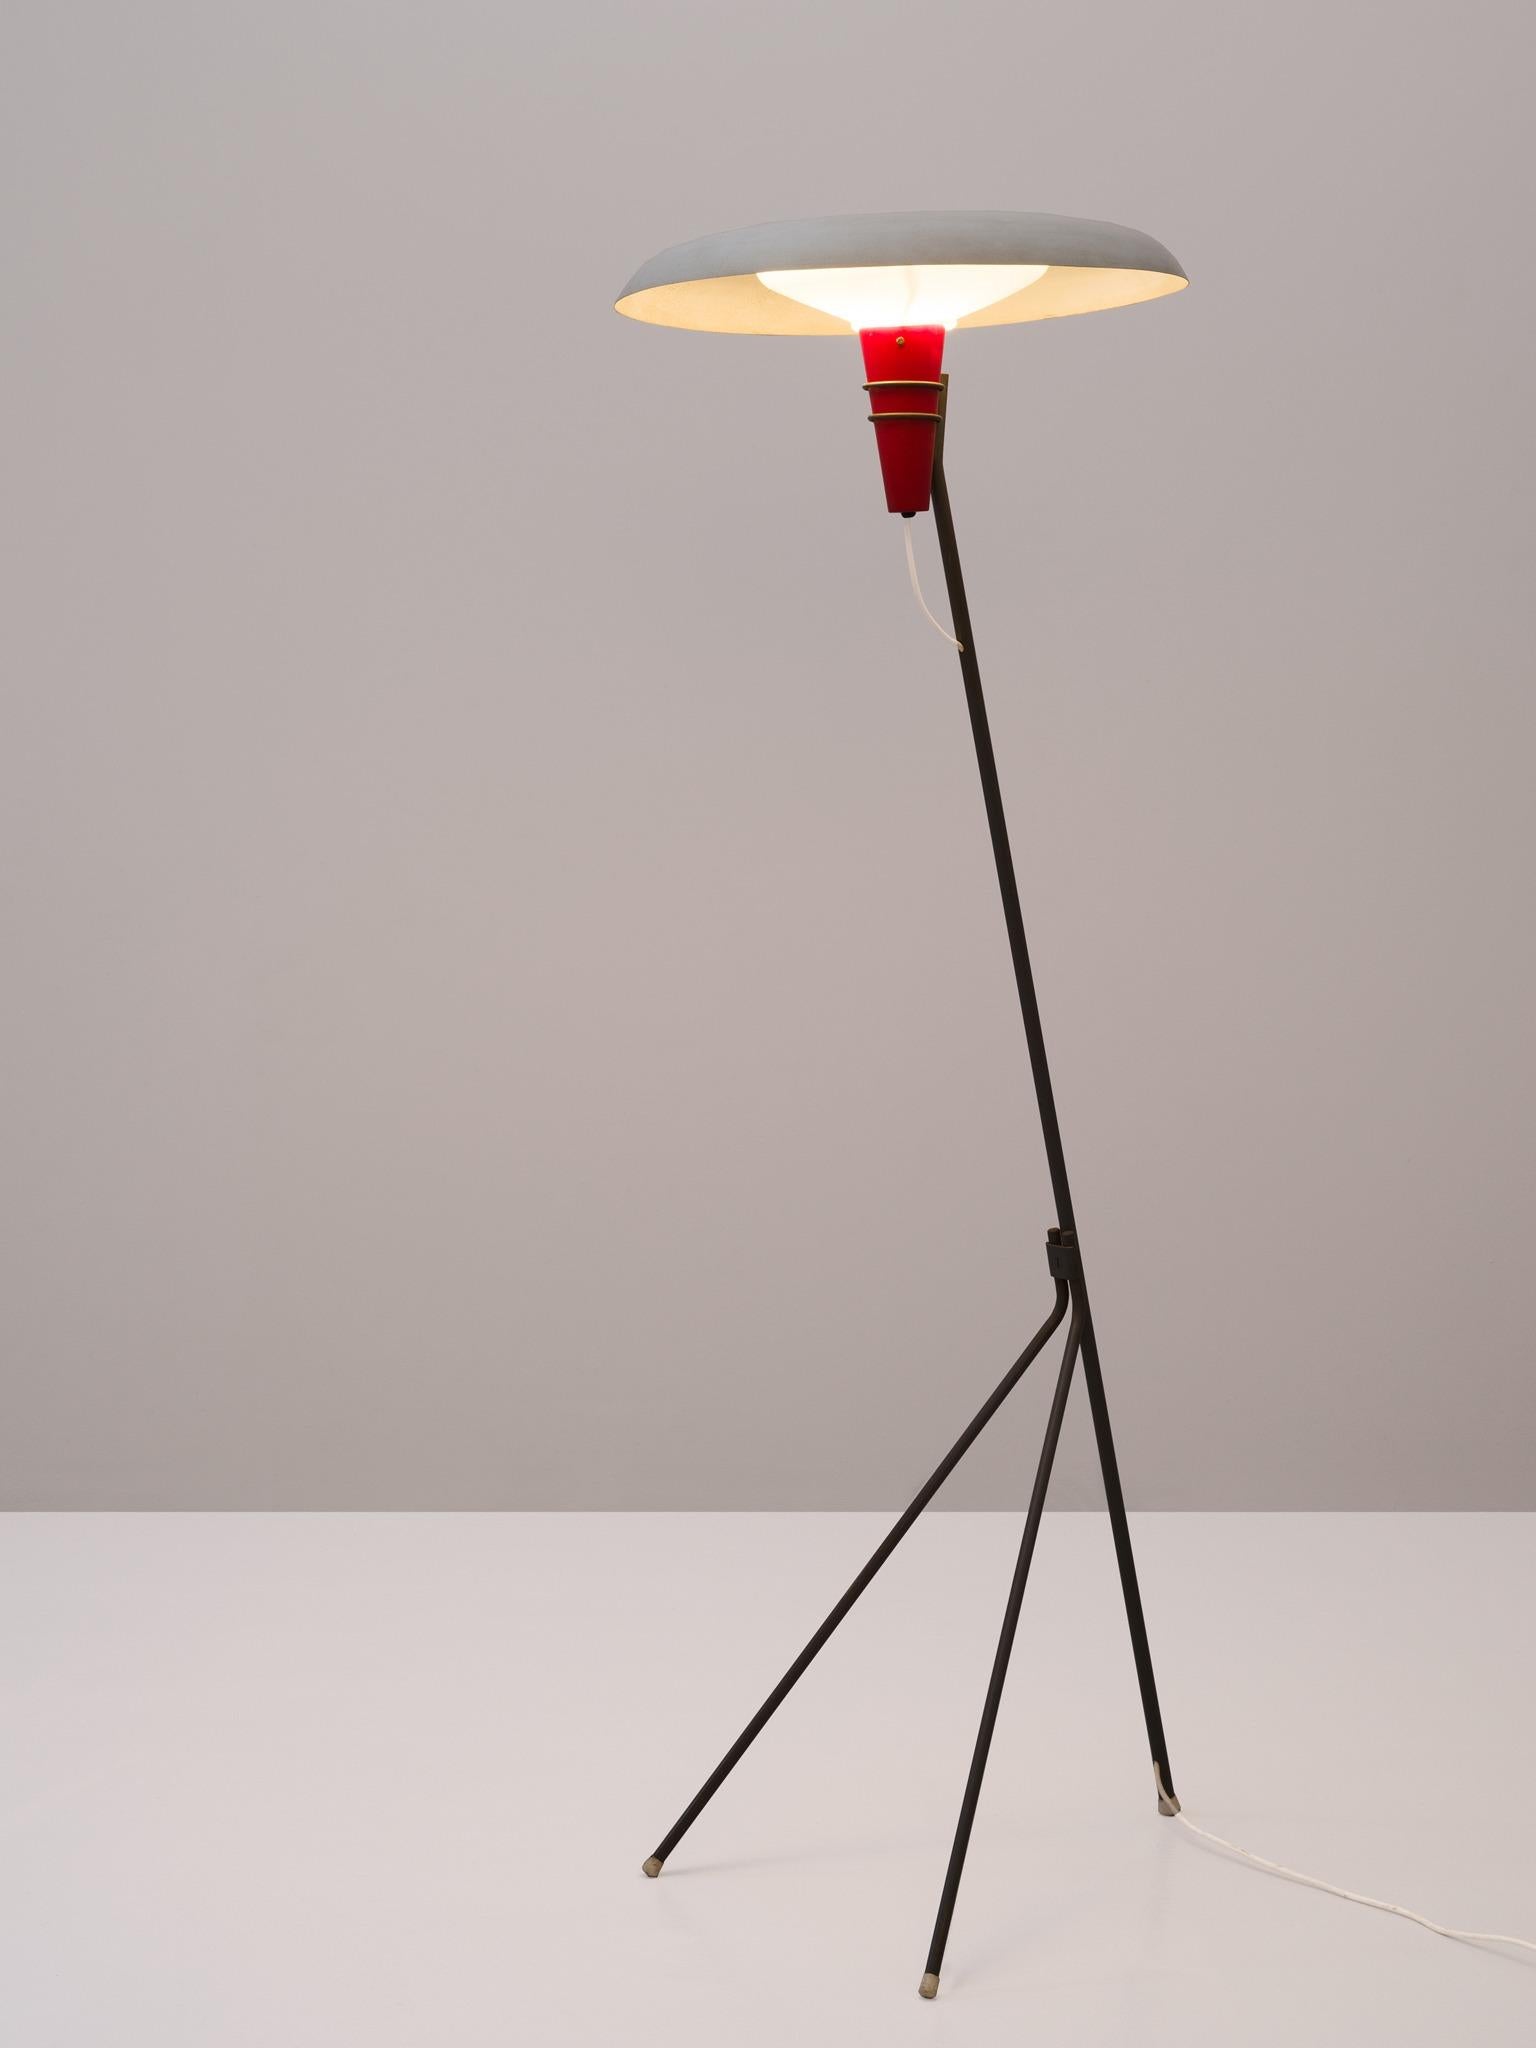 Louis C. Kalff for Philips, floor lamp model NX38, in metal, the Netherlands, 1957.

Modern tripod floorlamp by Dutch engineer and designer Louis Christiaan Kalff. This light has a simplistic design, yet highly functional. The frame is